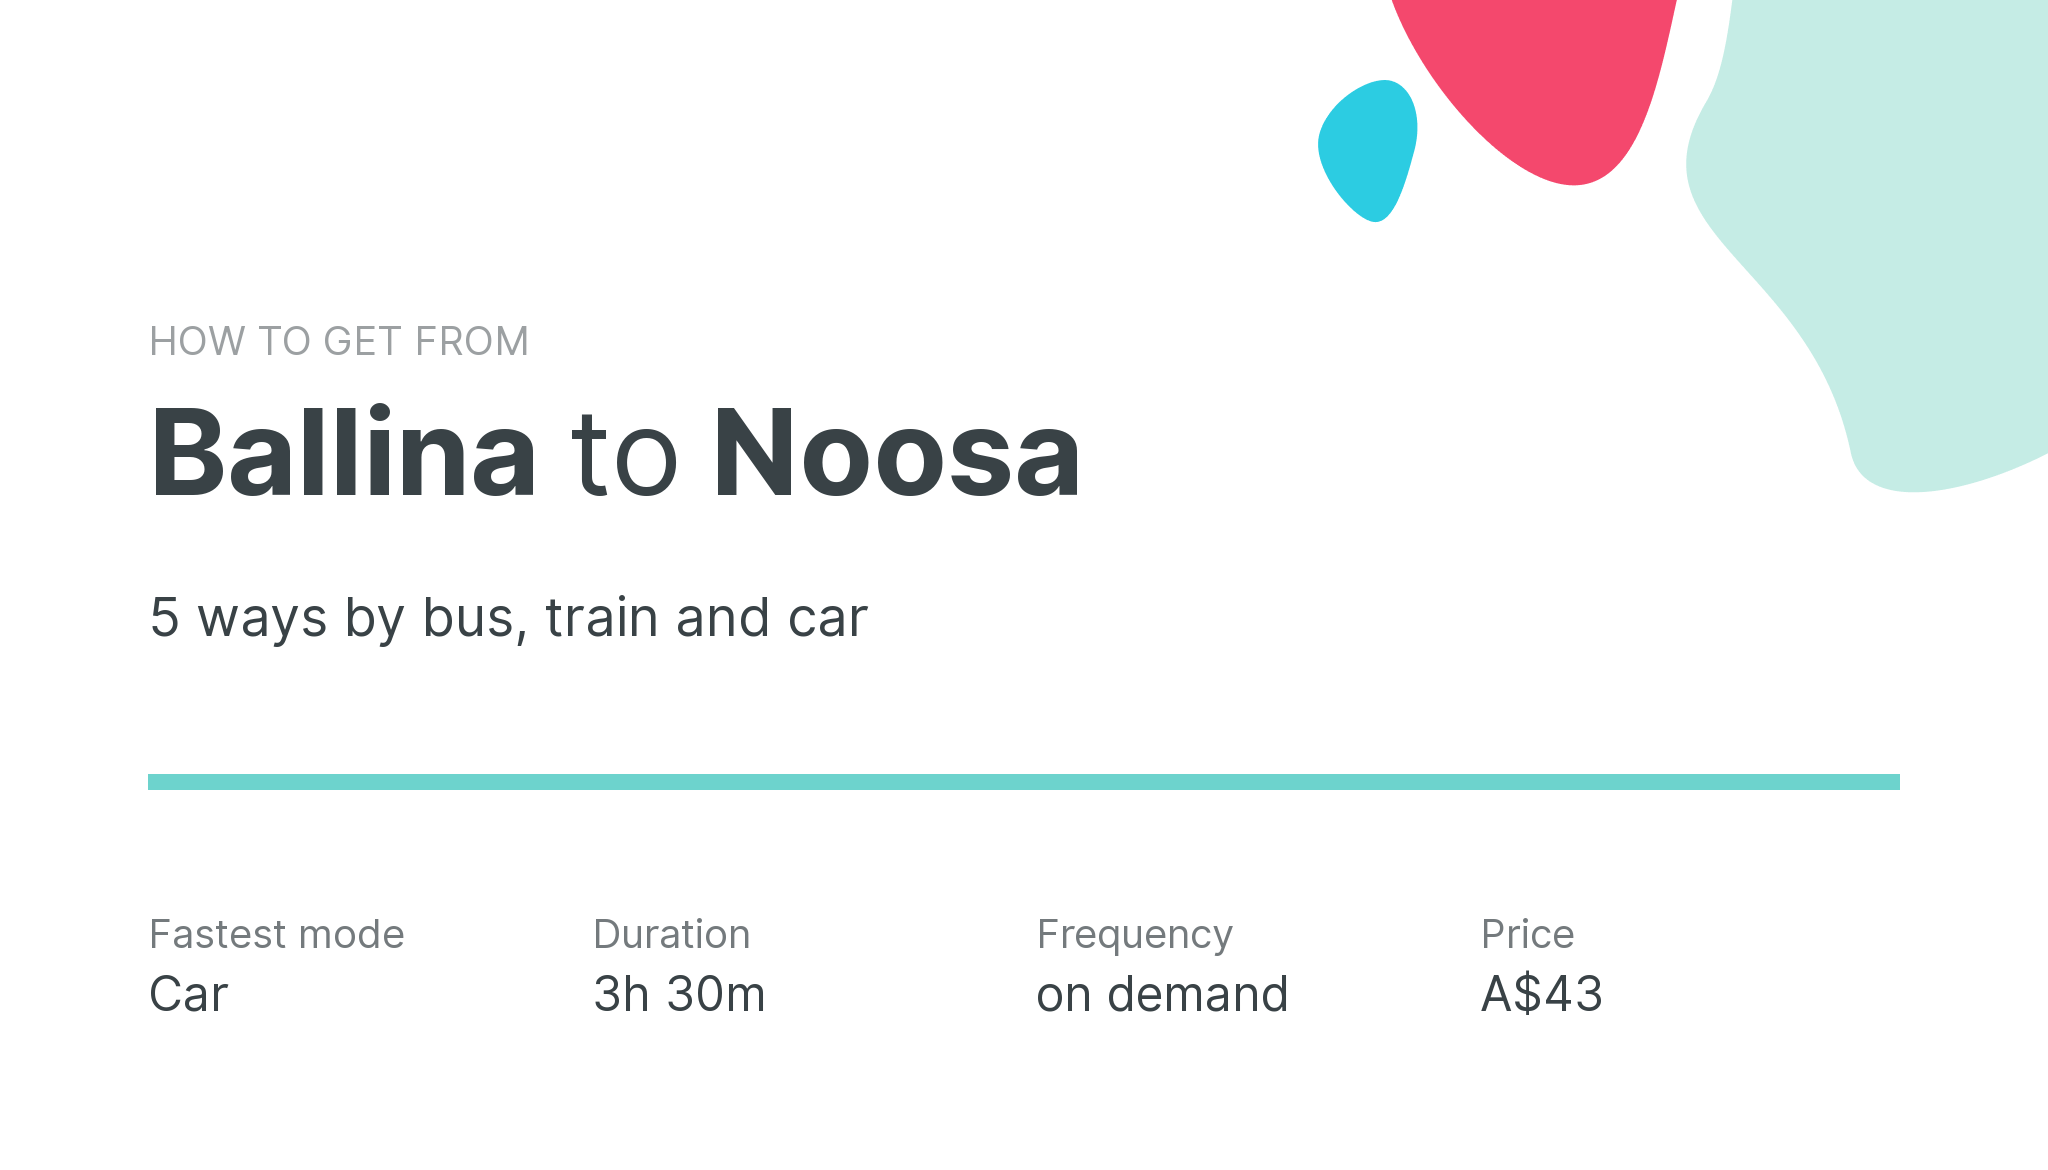 How do I get from Ballina to Noosa